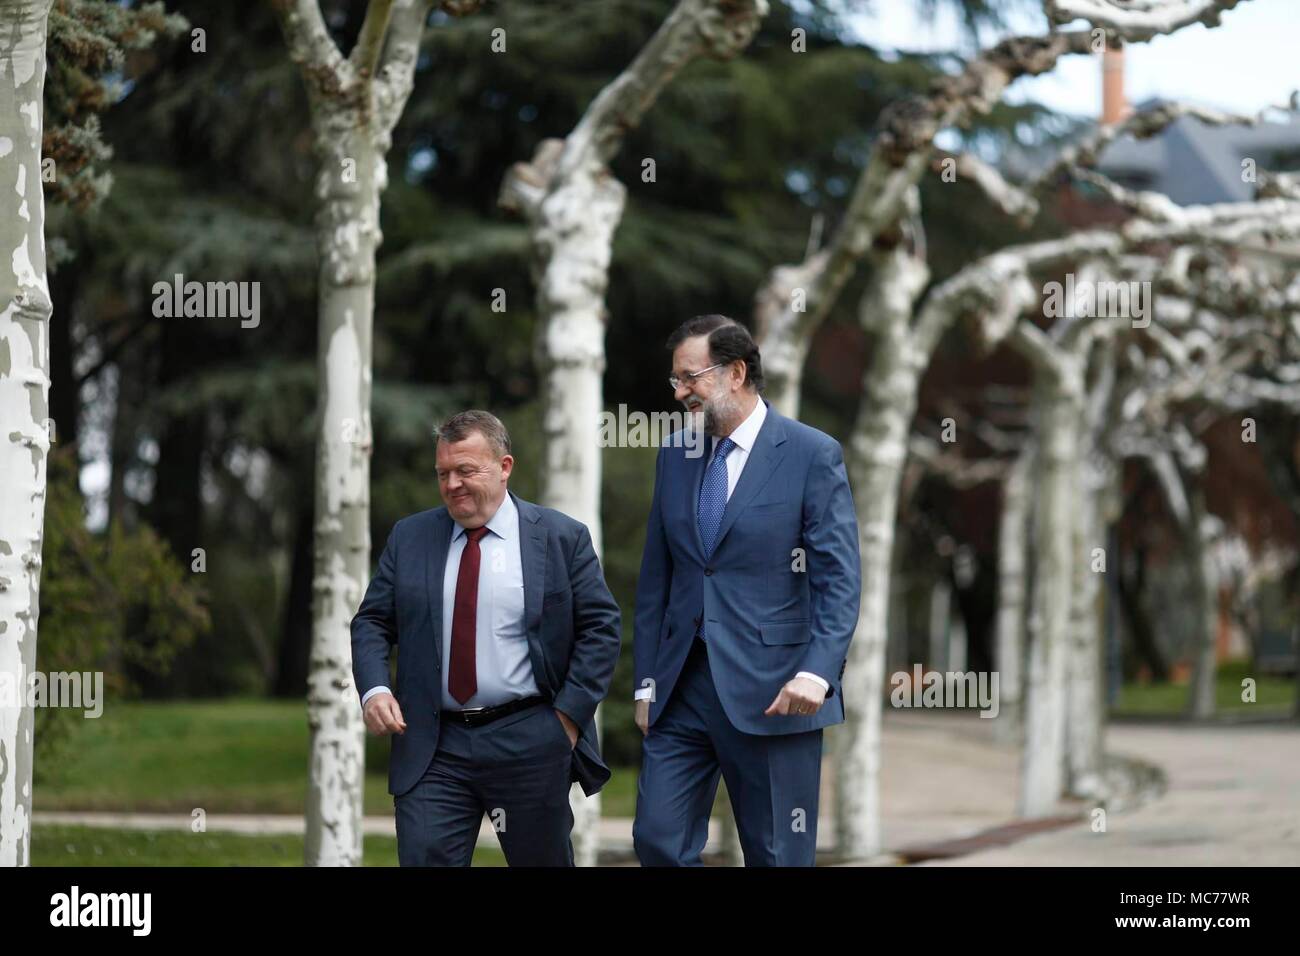 Spanish President Mariano Rajoy and Denmark Prime Minister, Lars Lokke Rasmussen  strolling through the garden of the Moncloa Palace on April 13, 2018 in Madrid.  Cordon Press/EP888 Stock Photo